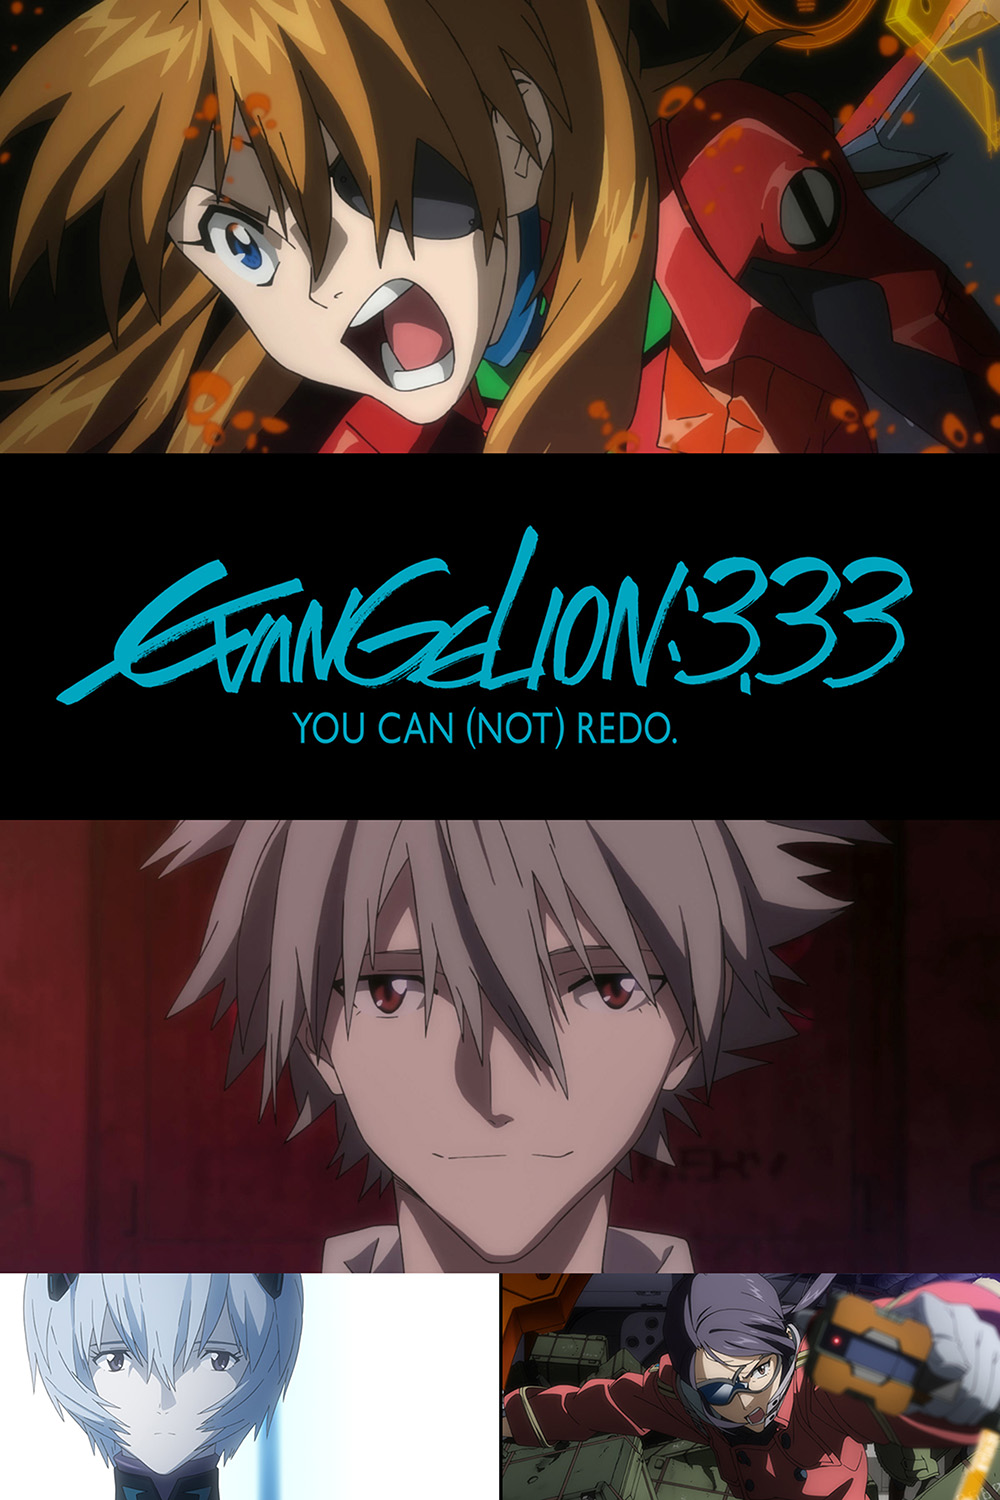 Evangelion 3.33 You can redo